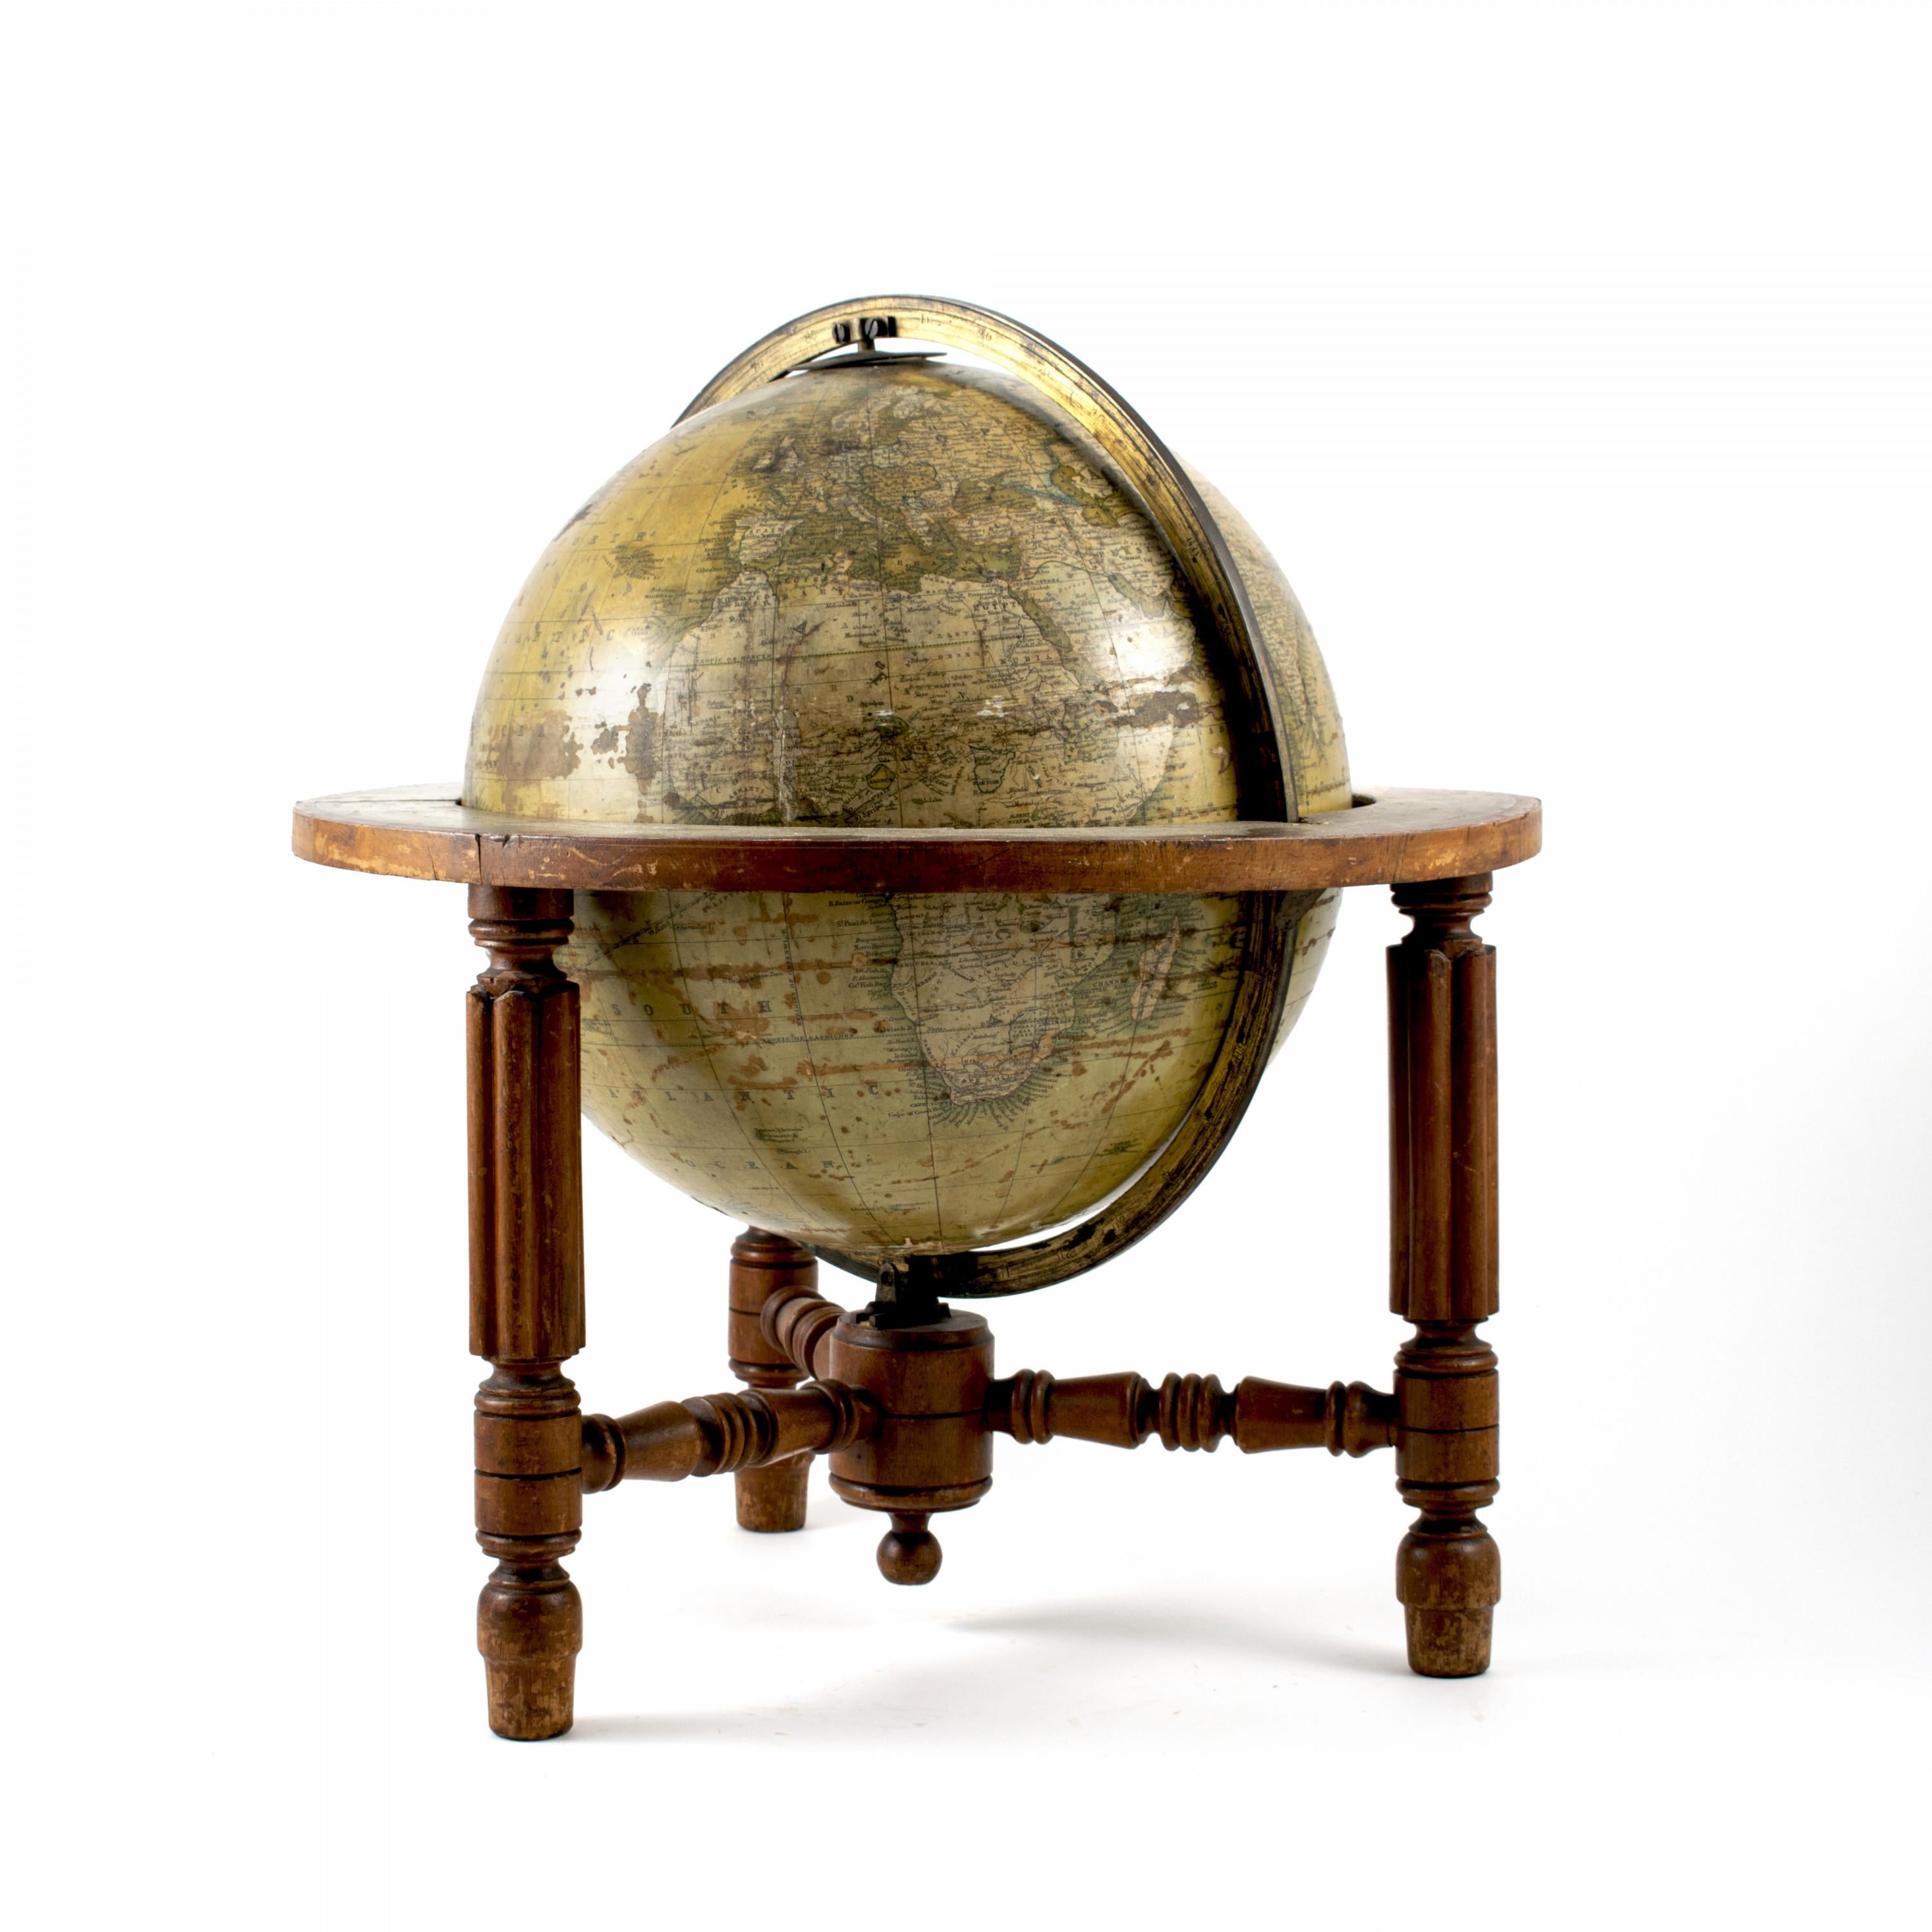 A terrestrial table globe, James Wyld, London.
Supported by a turned mahogany stand with three legs,
England, mid-18th century.
Original untouched condition, patina consistent with age and use.
  